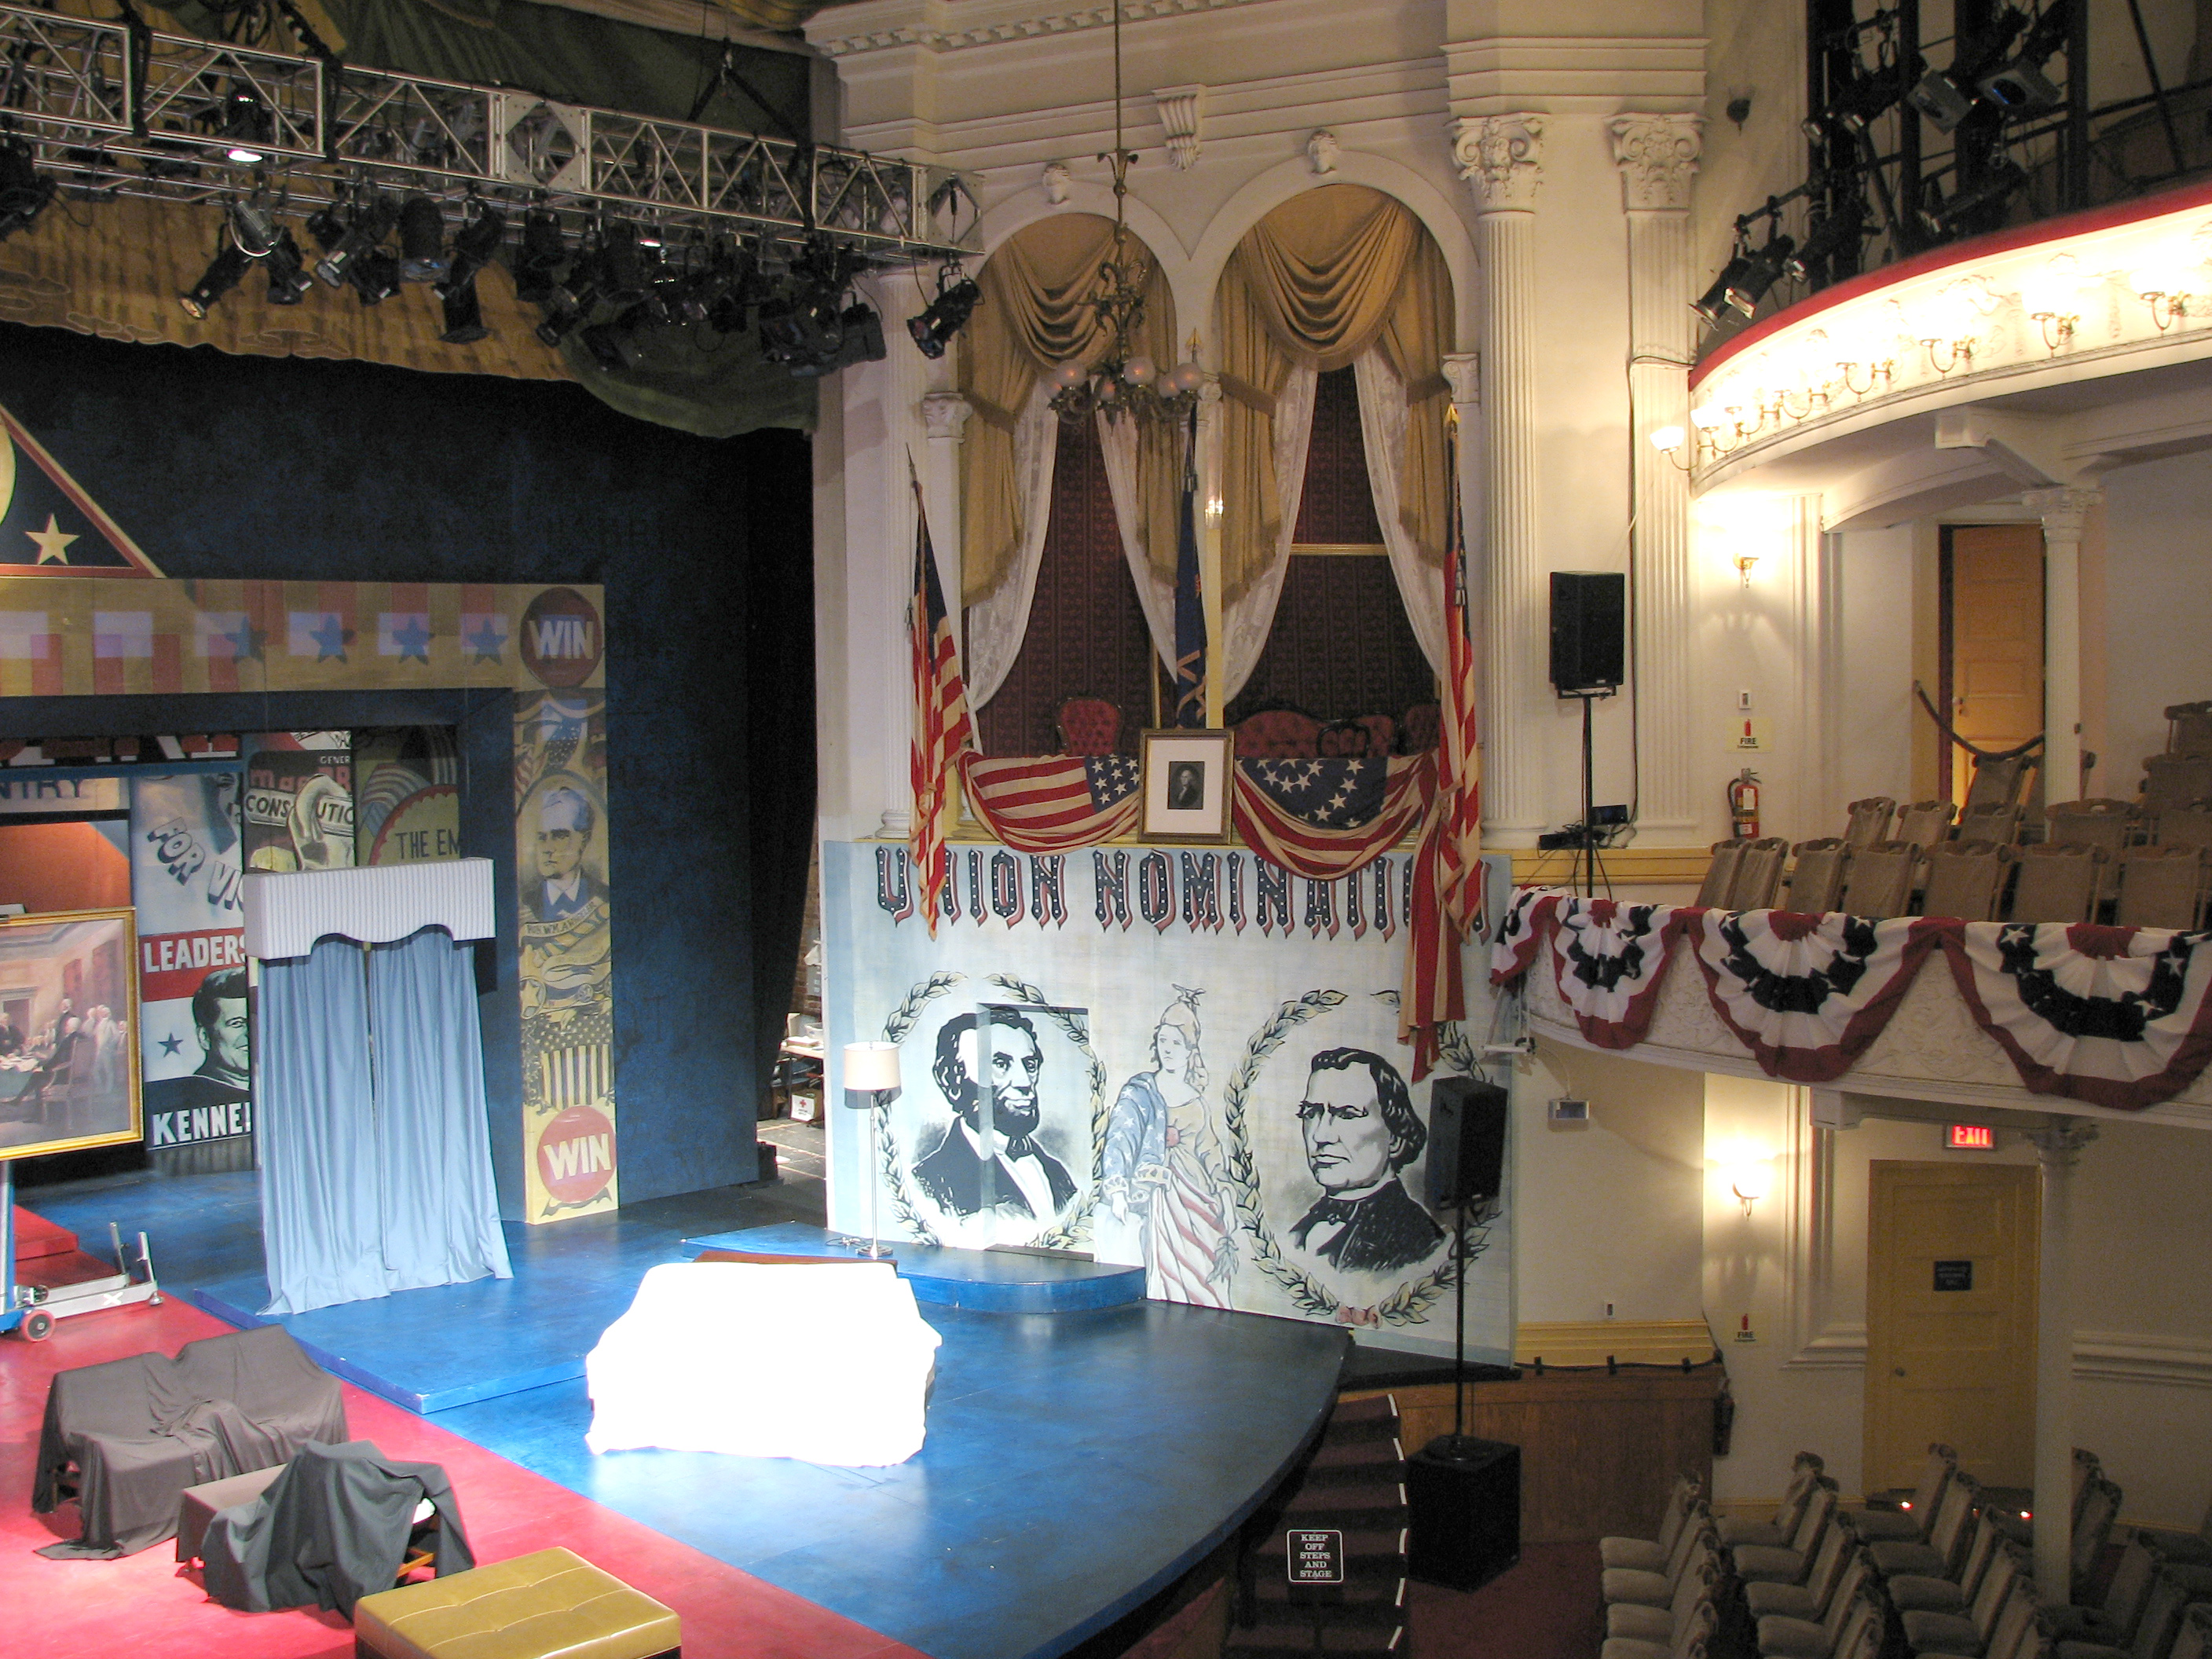 Tour of the ford theater